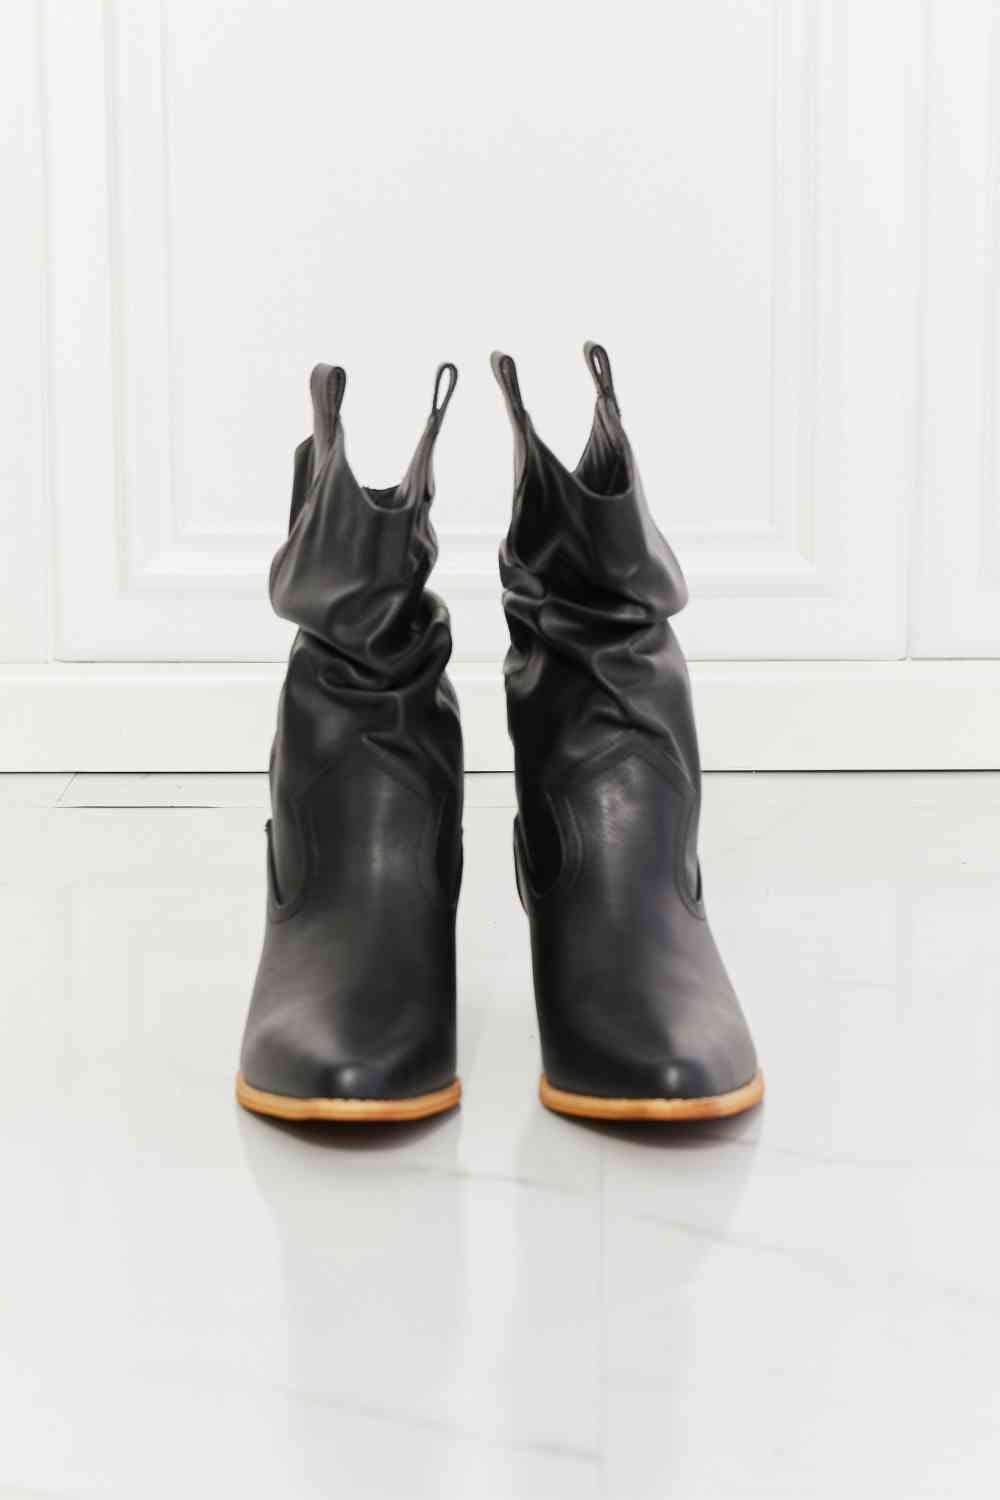 MMShoes Better in Texas Scrunch Cowboy Boots in Black - Fashion Girl Online Store